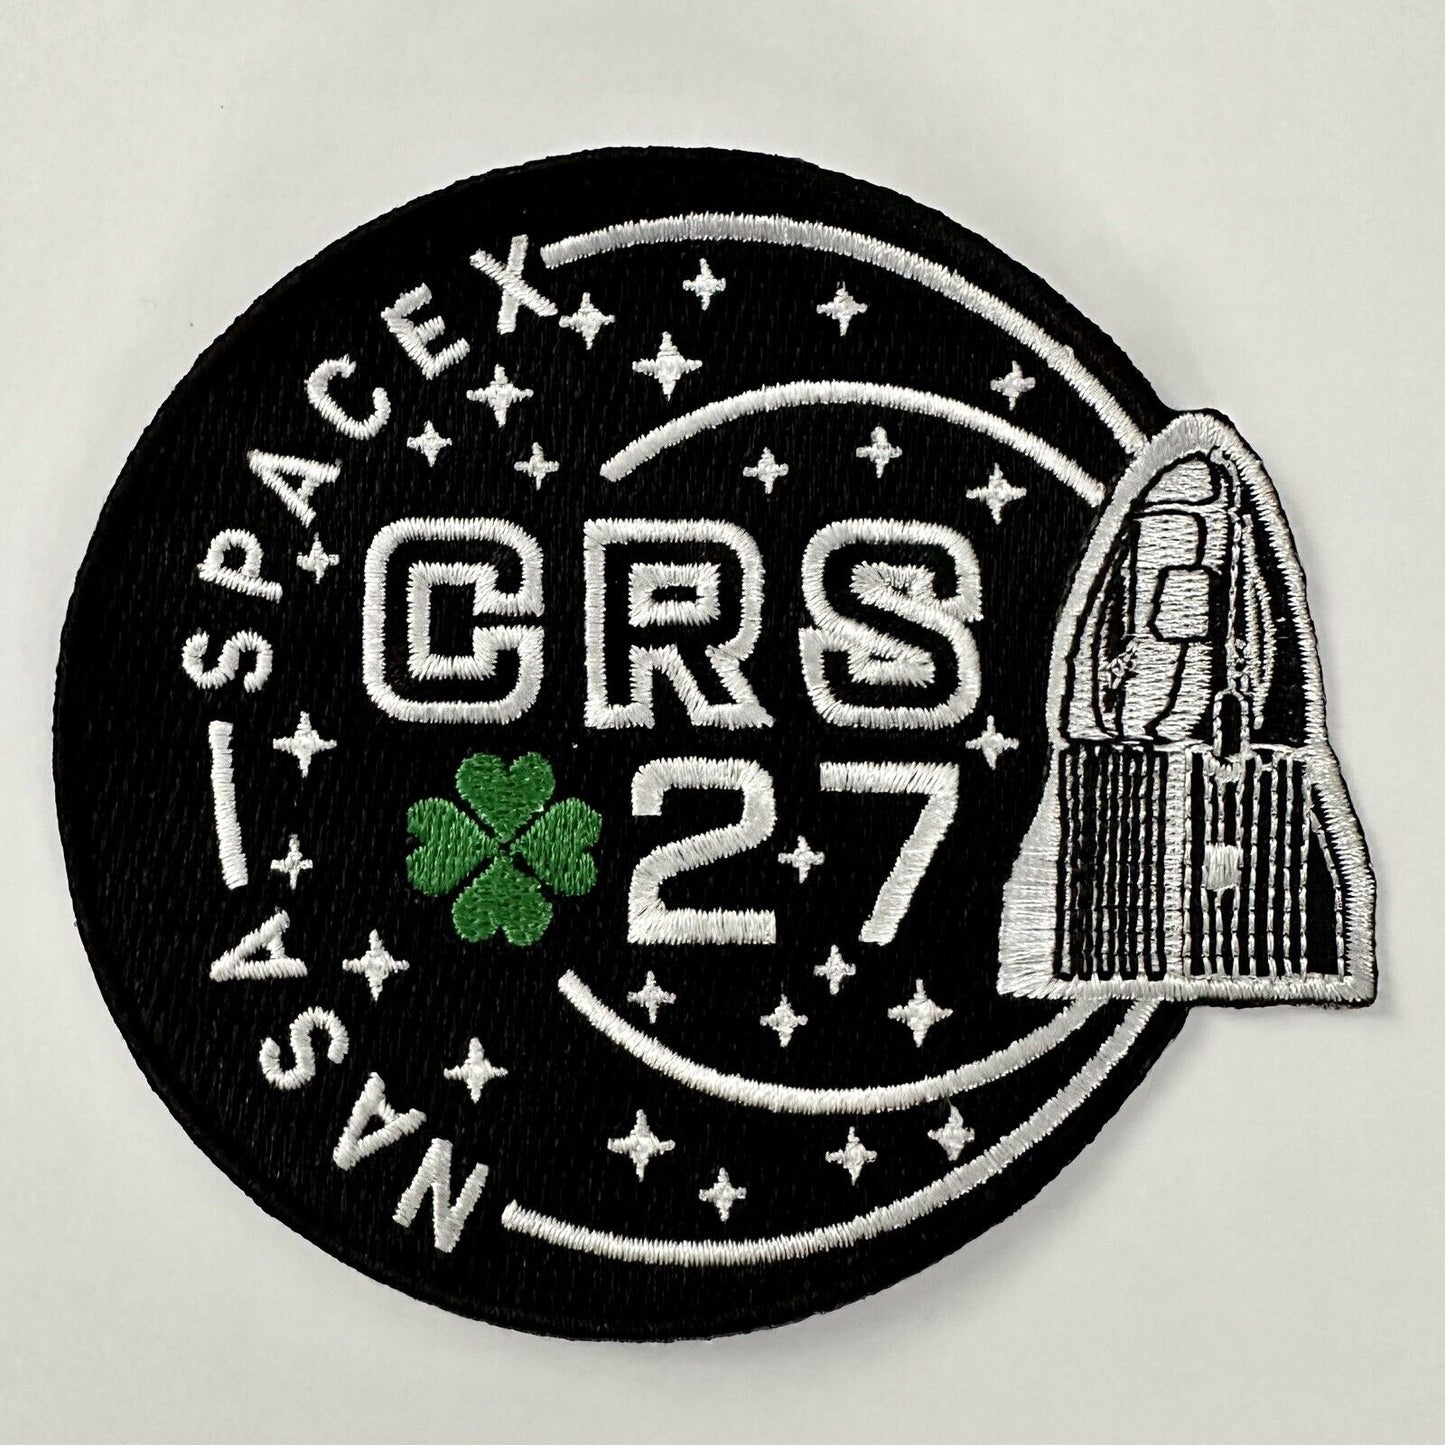 ORIGINAL SPACE X  CRS - 27 DRAGON MISSION PATCH NASA FALCON 9 ISS